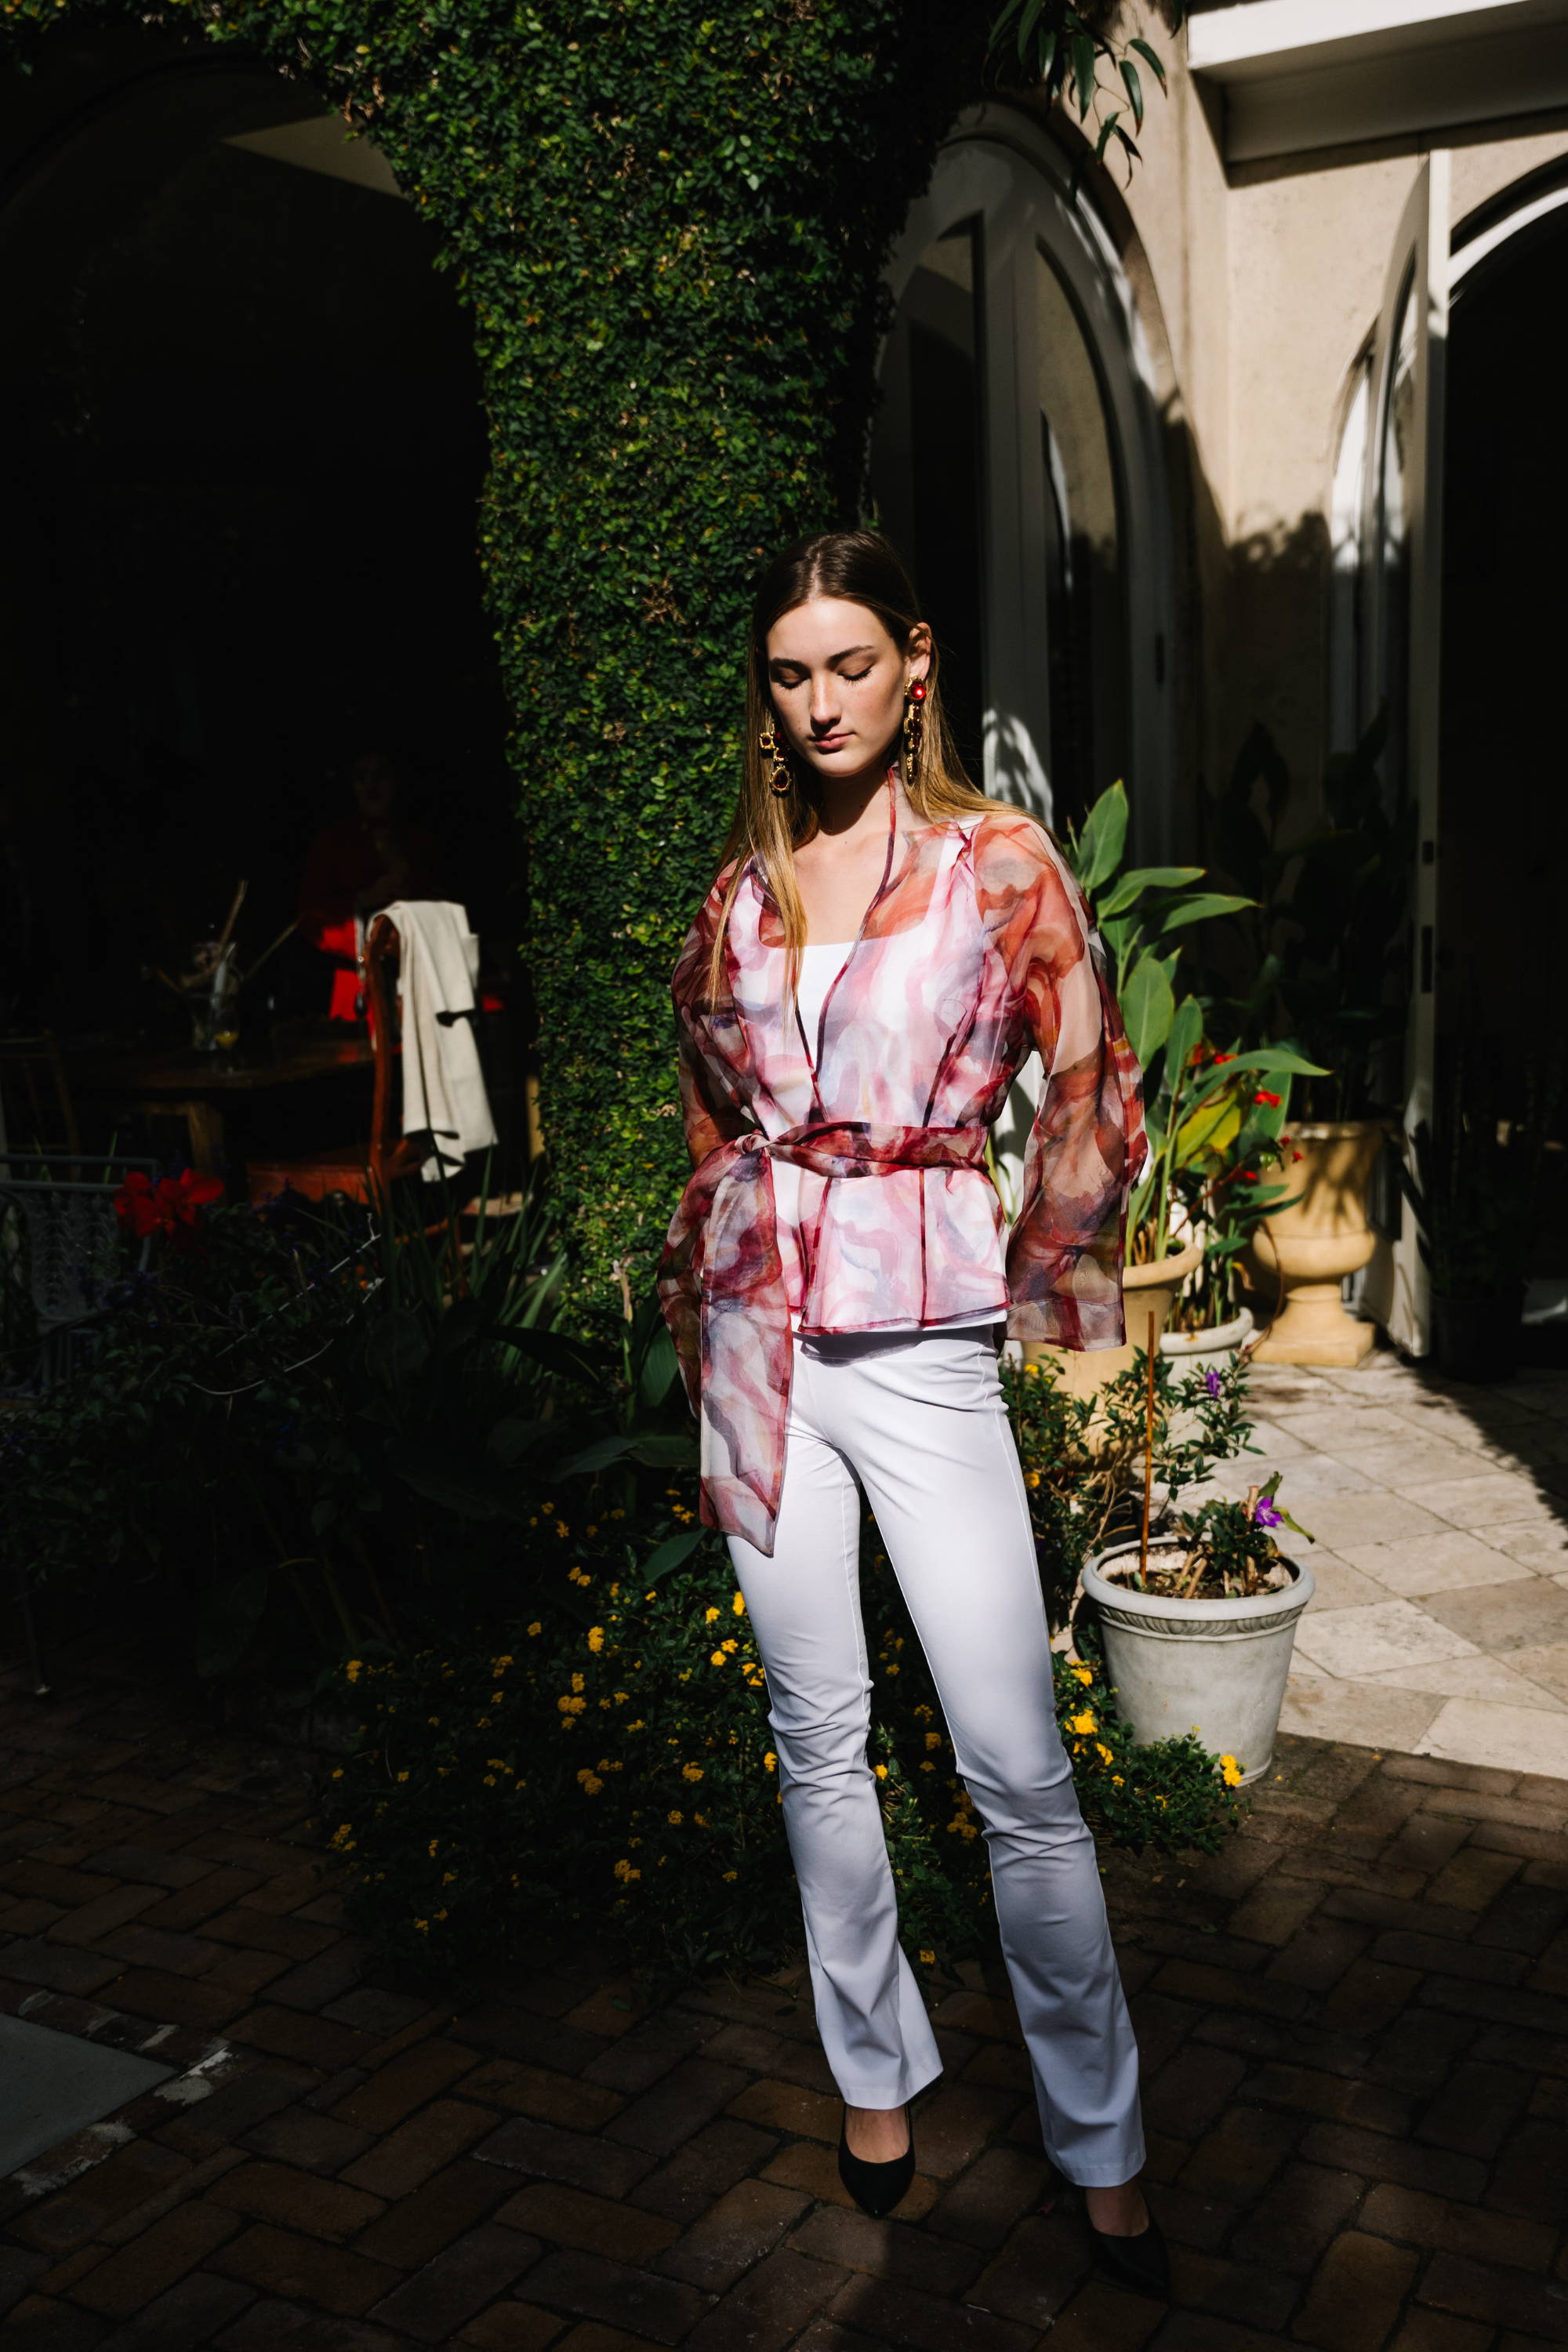 Woman wearing rose printed organza shirt over white stretch cotton tank top and pants by Ala von Auersperg